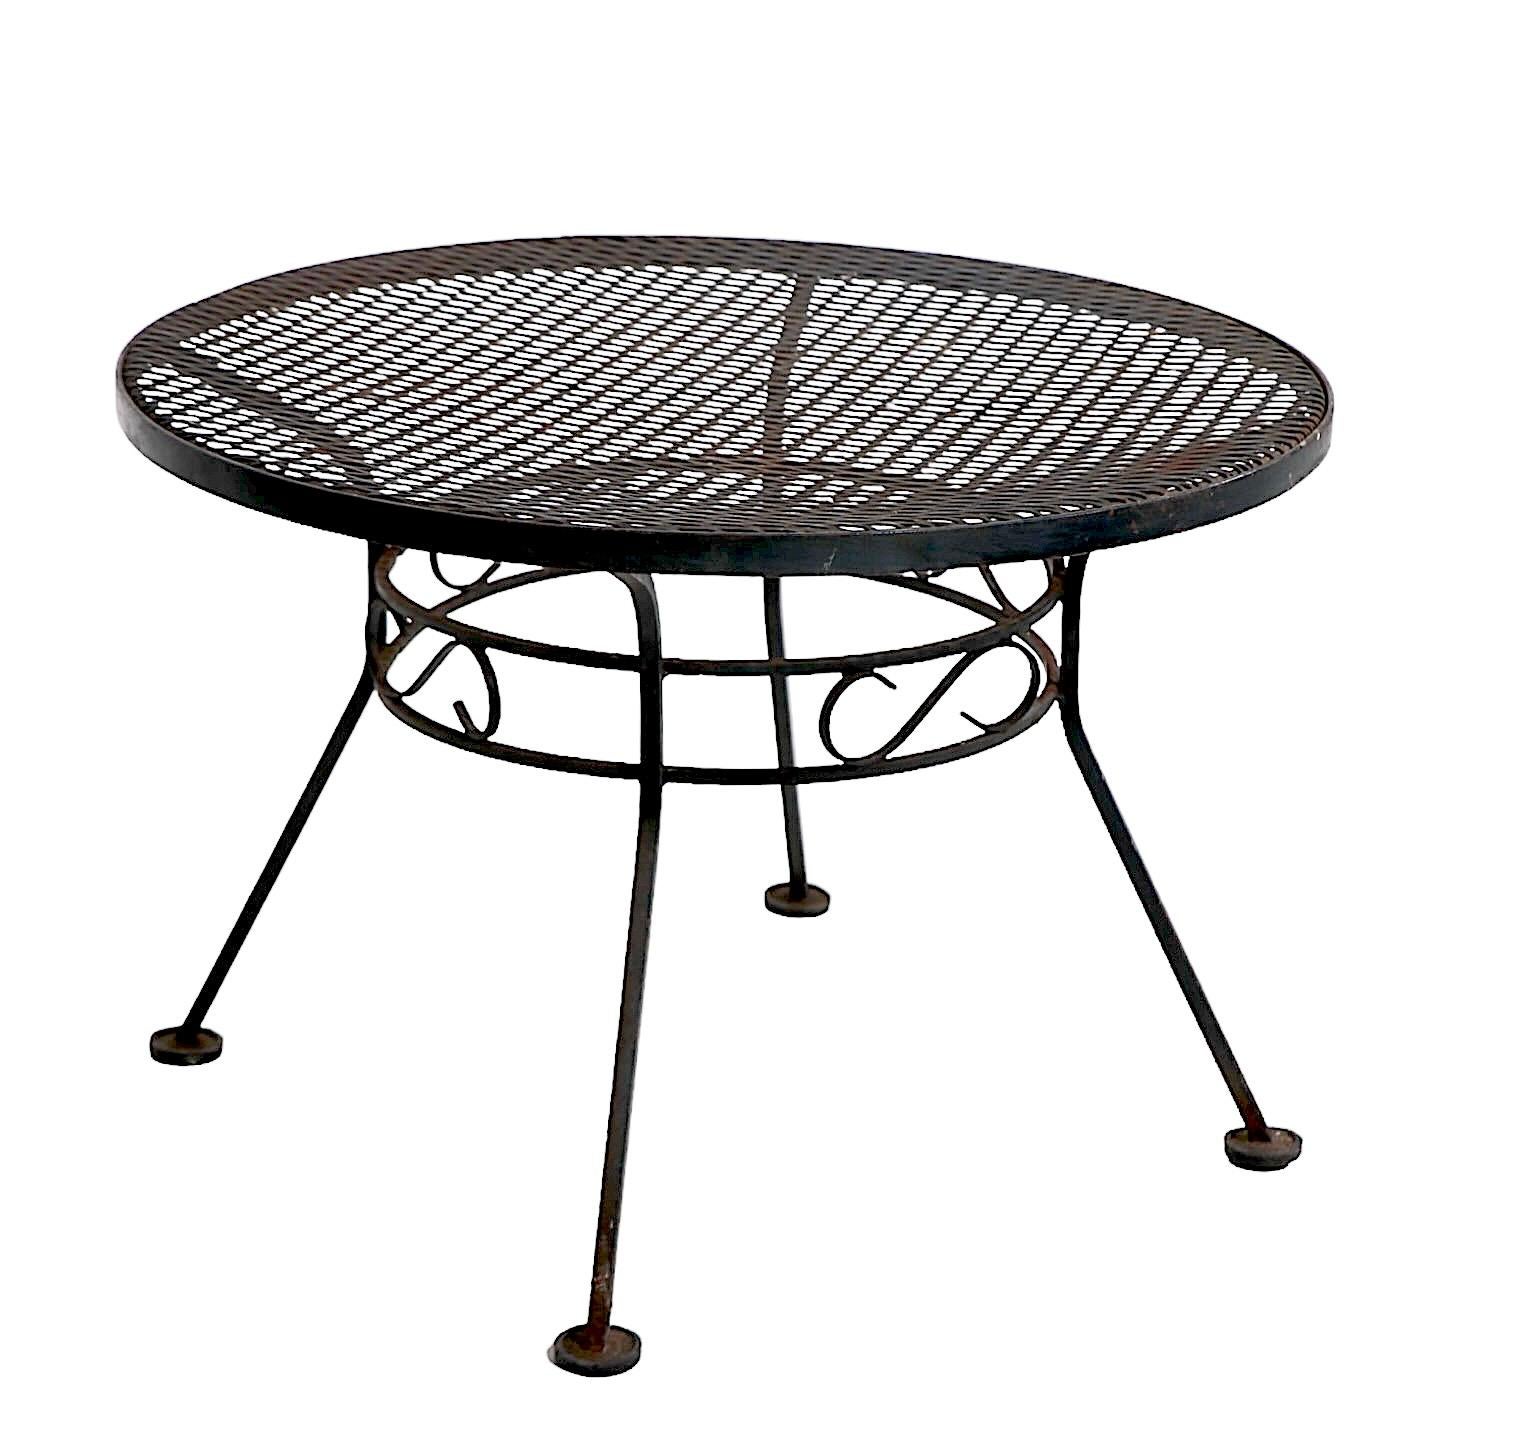 Mid-Century Modern  Small Wrought Iron  Garden Patio Poolside Table by Woodard c. 1940/60's For Sale